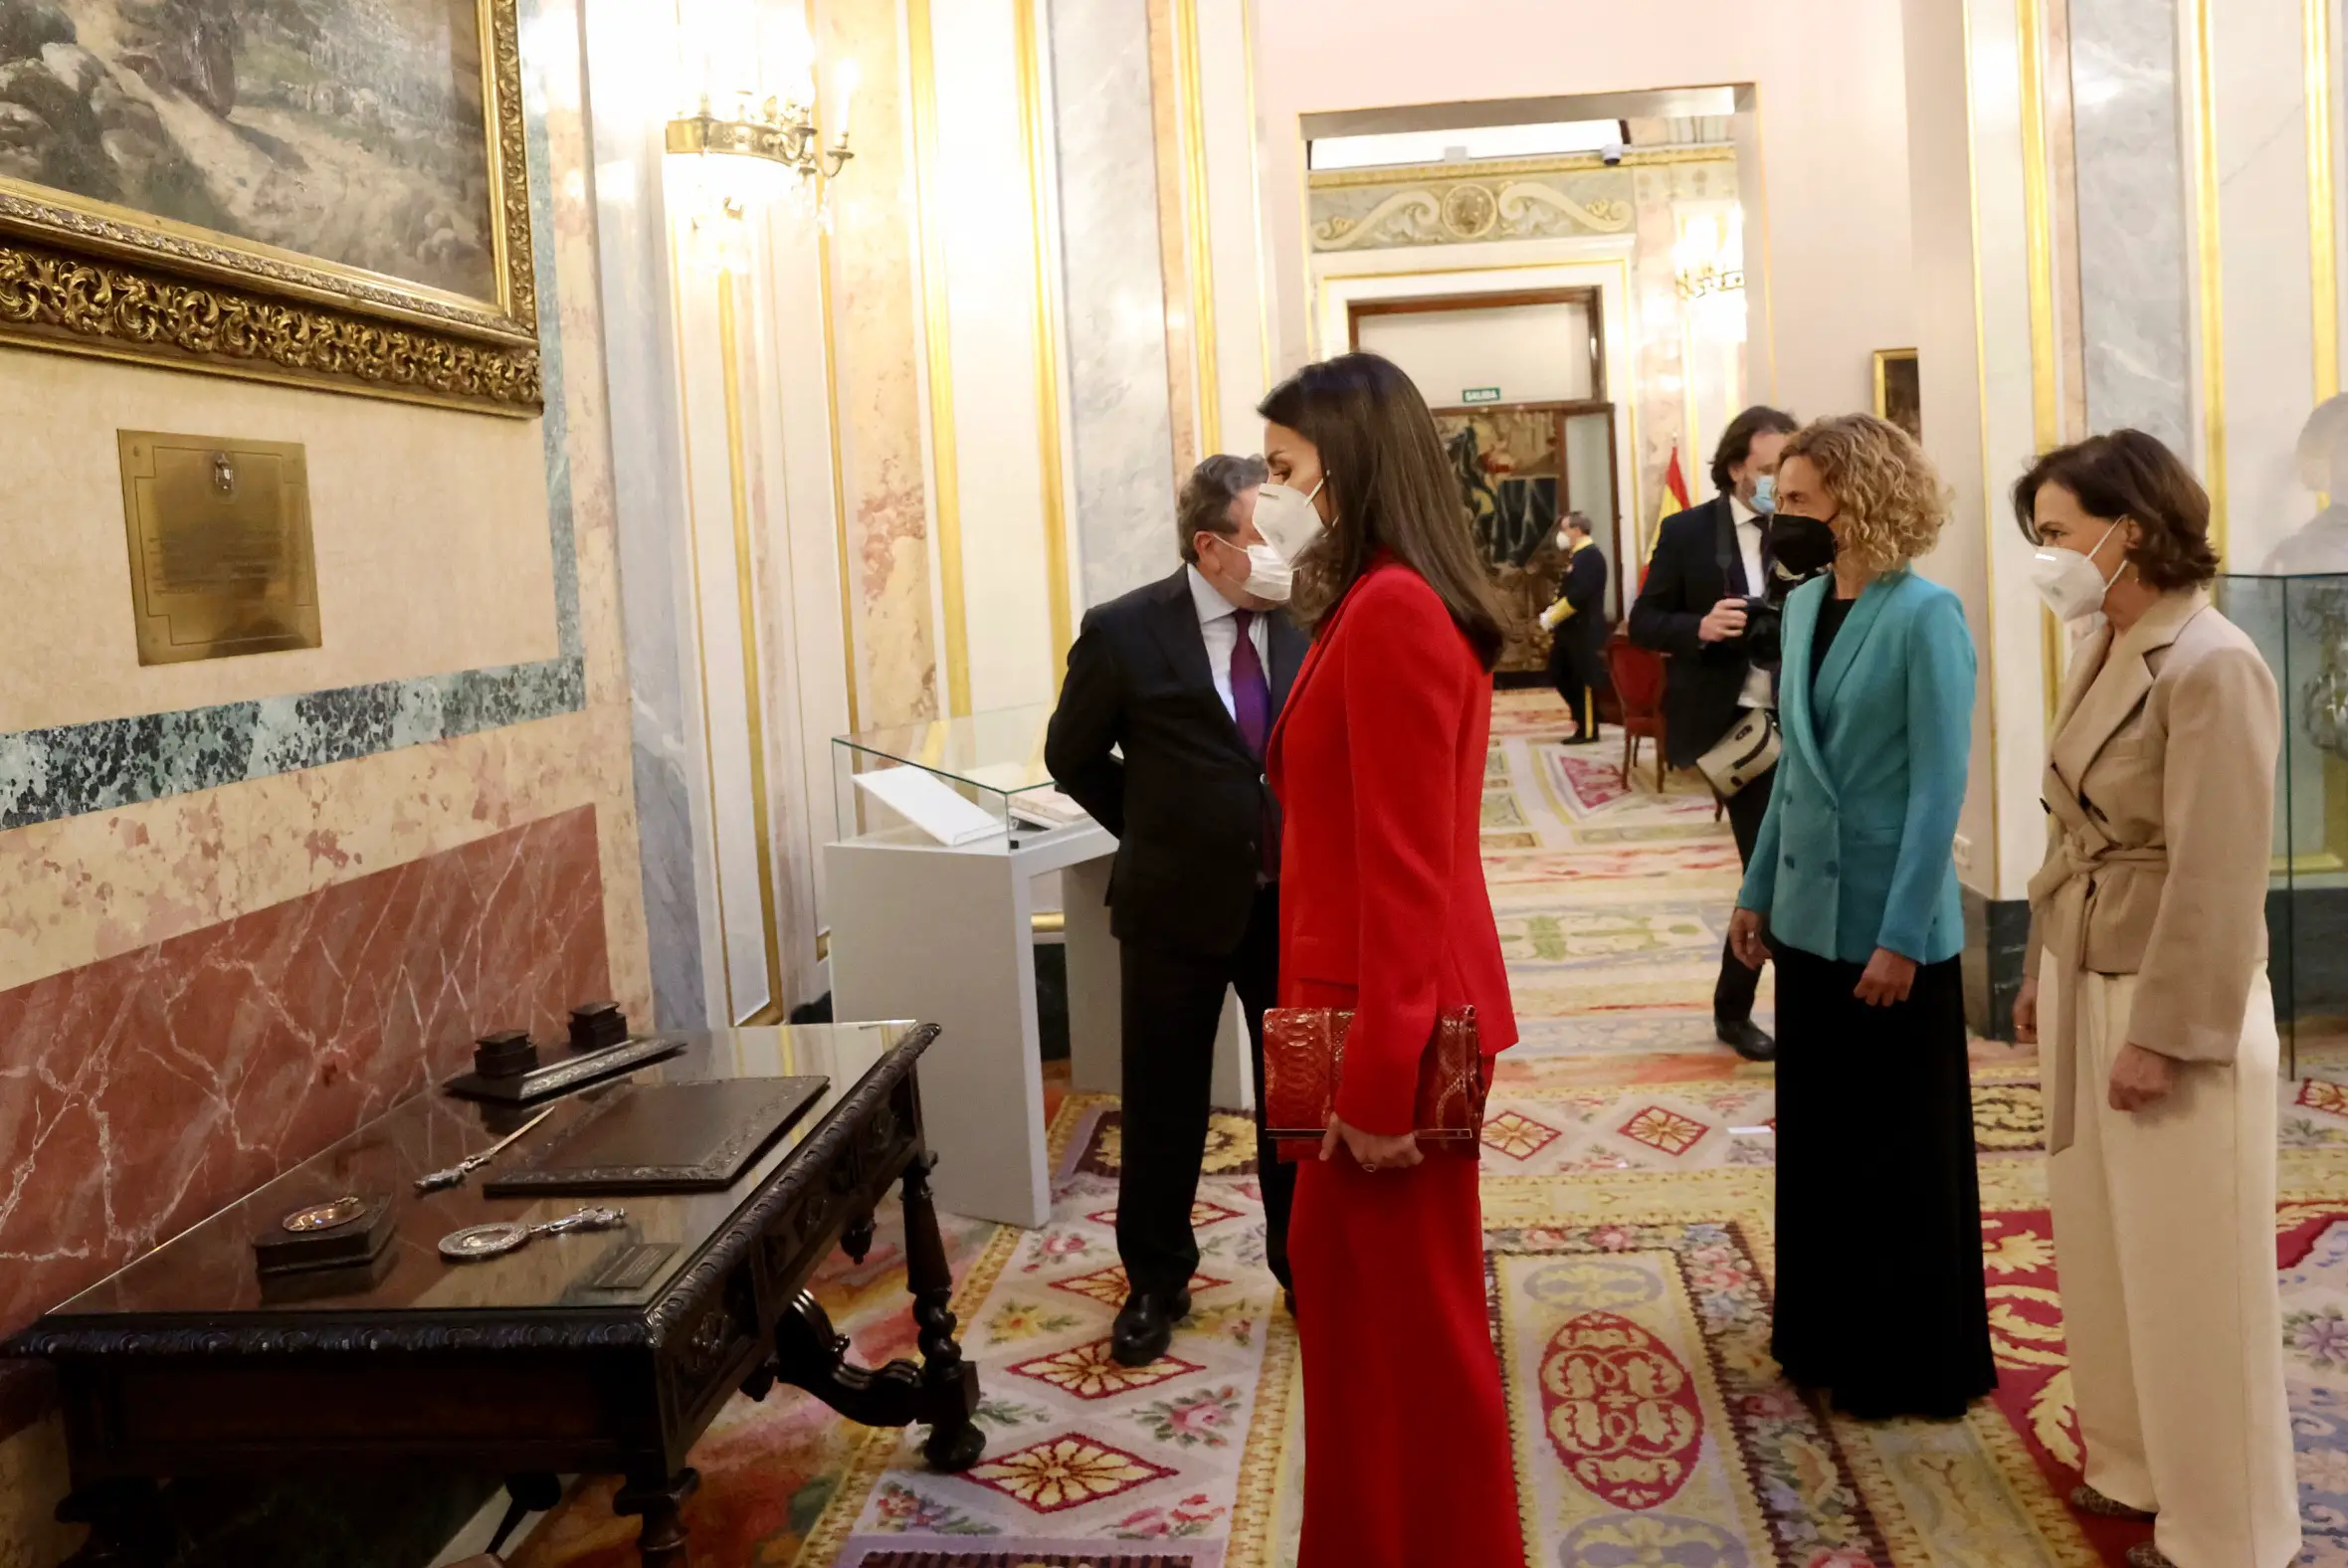 Spanish Queen Letizia paid tribute to Clara Campoamor who fought for women's voting rights in Spain